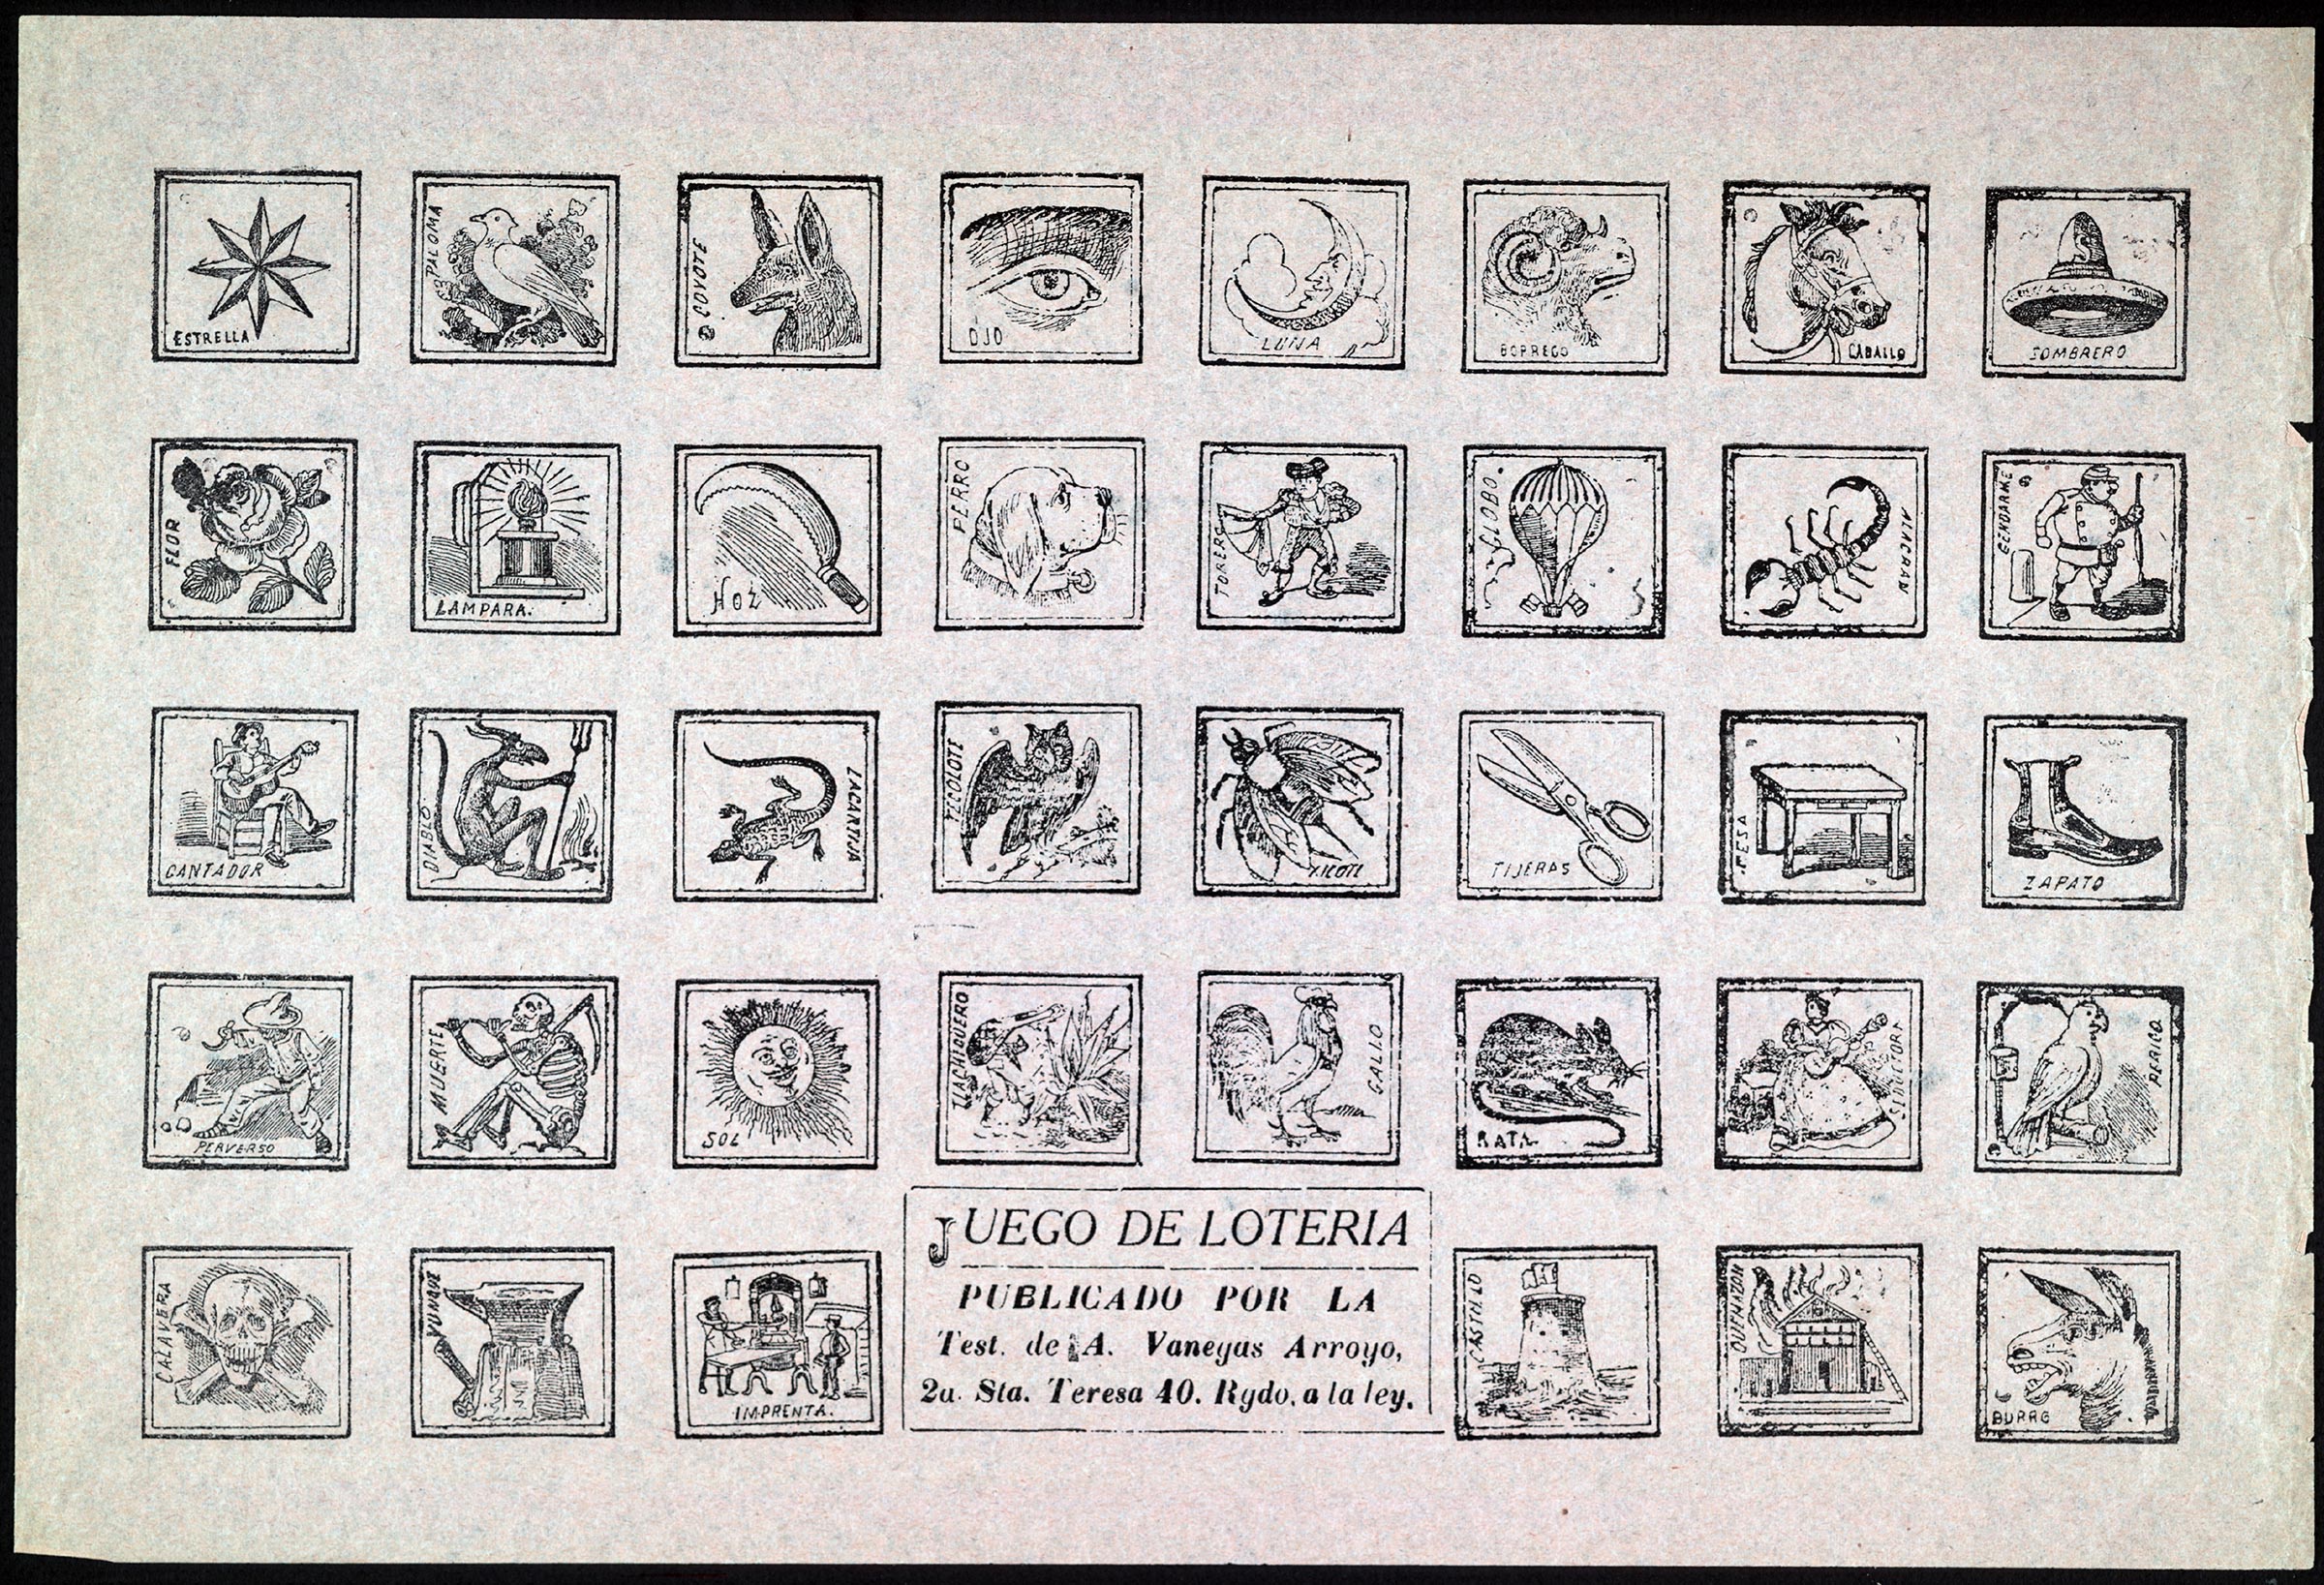 Lotería game by José Guadalupe Posada, published in Mexico City between 1909 and 1920. (Universal Images Group/Getty Images)